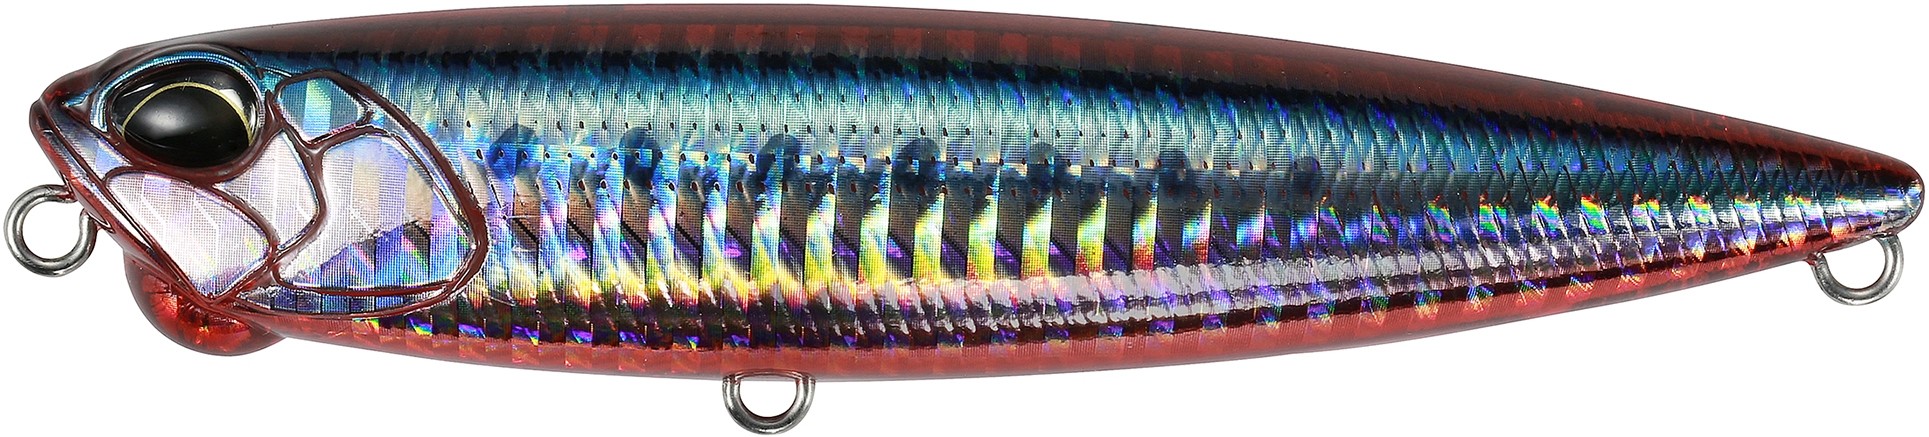 Wtd Duo Realis Pencil 100 SW col. GHA0327 Red Mullet